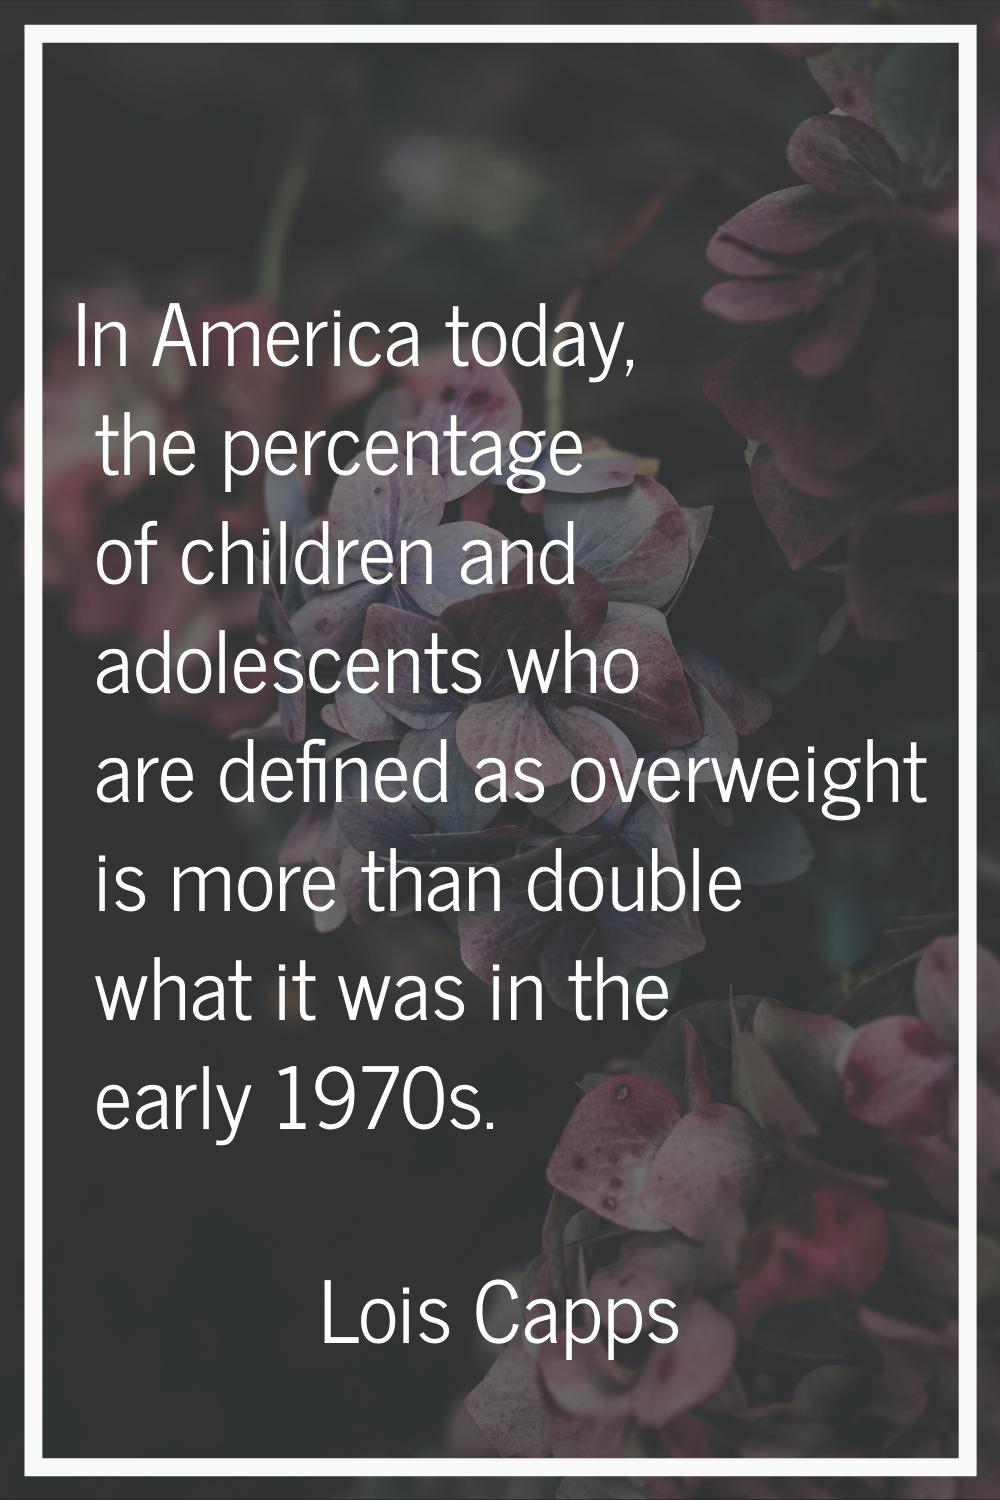 In America today, the percentage of children and adolescents who are defined as overweight is more 